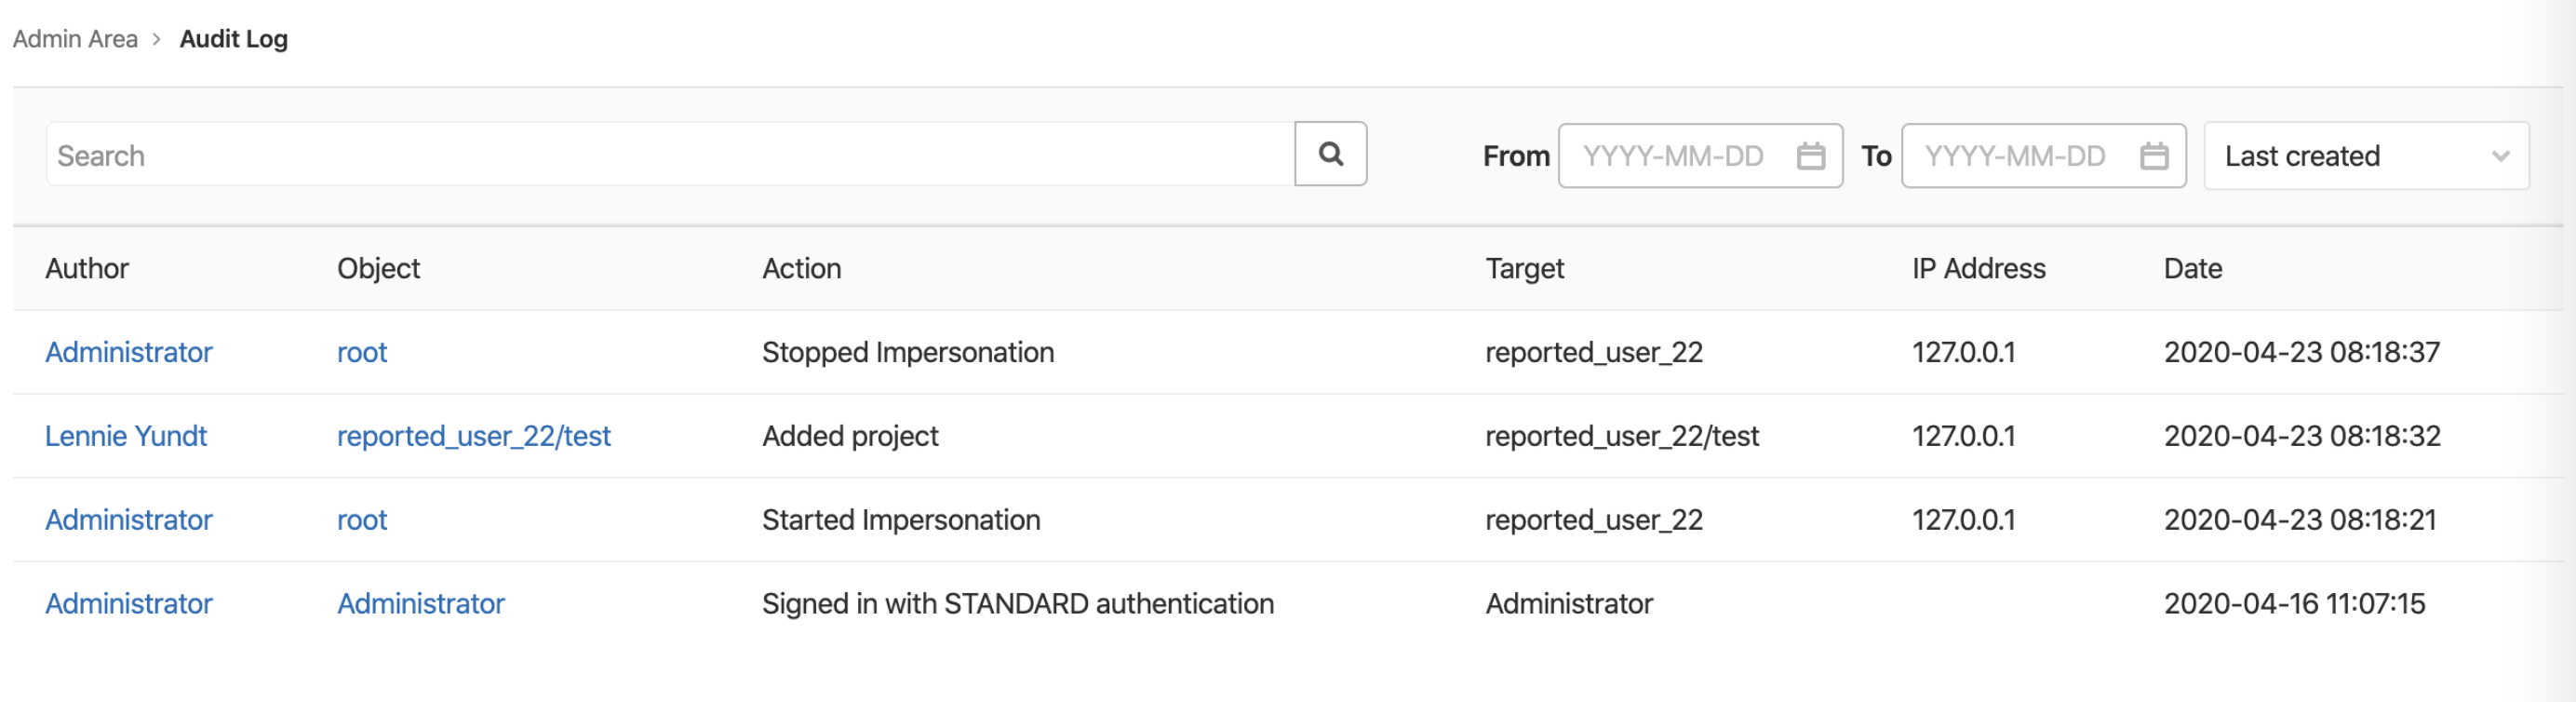 Filtered search for instance-level audit events